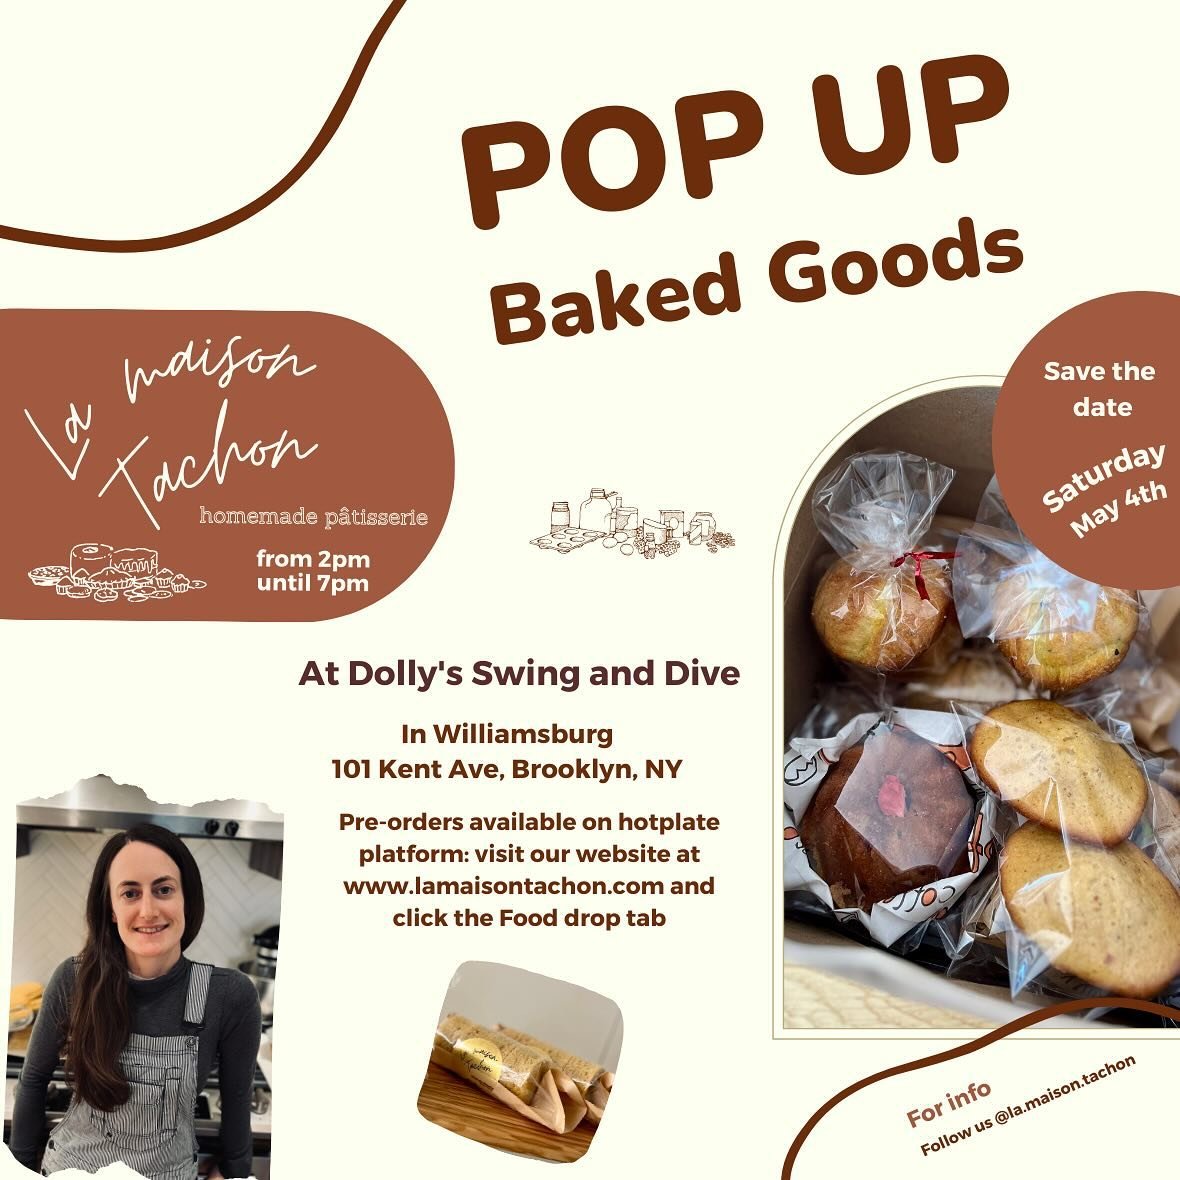 Hello everyone 👋 

Save the date, next Saturday May 4 we will be at @dollysbk for our 1st Pop Up event in person 😊 we will have 3 exclusive products 🤤

I hope to see you there and come say Hi!

From 2pm to 7pm or sold out.

On the menu:

- strawbe